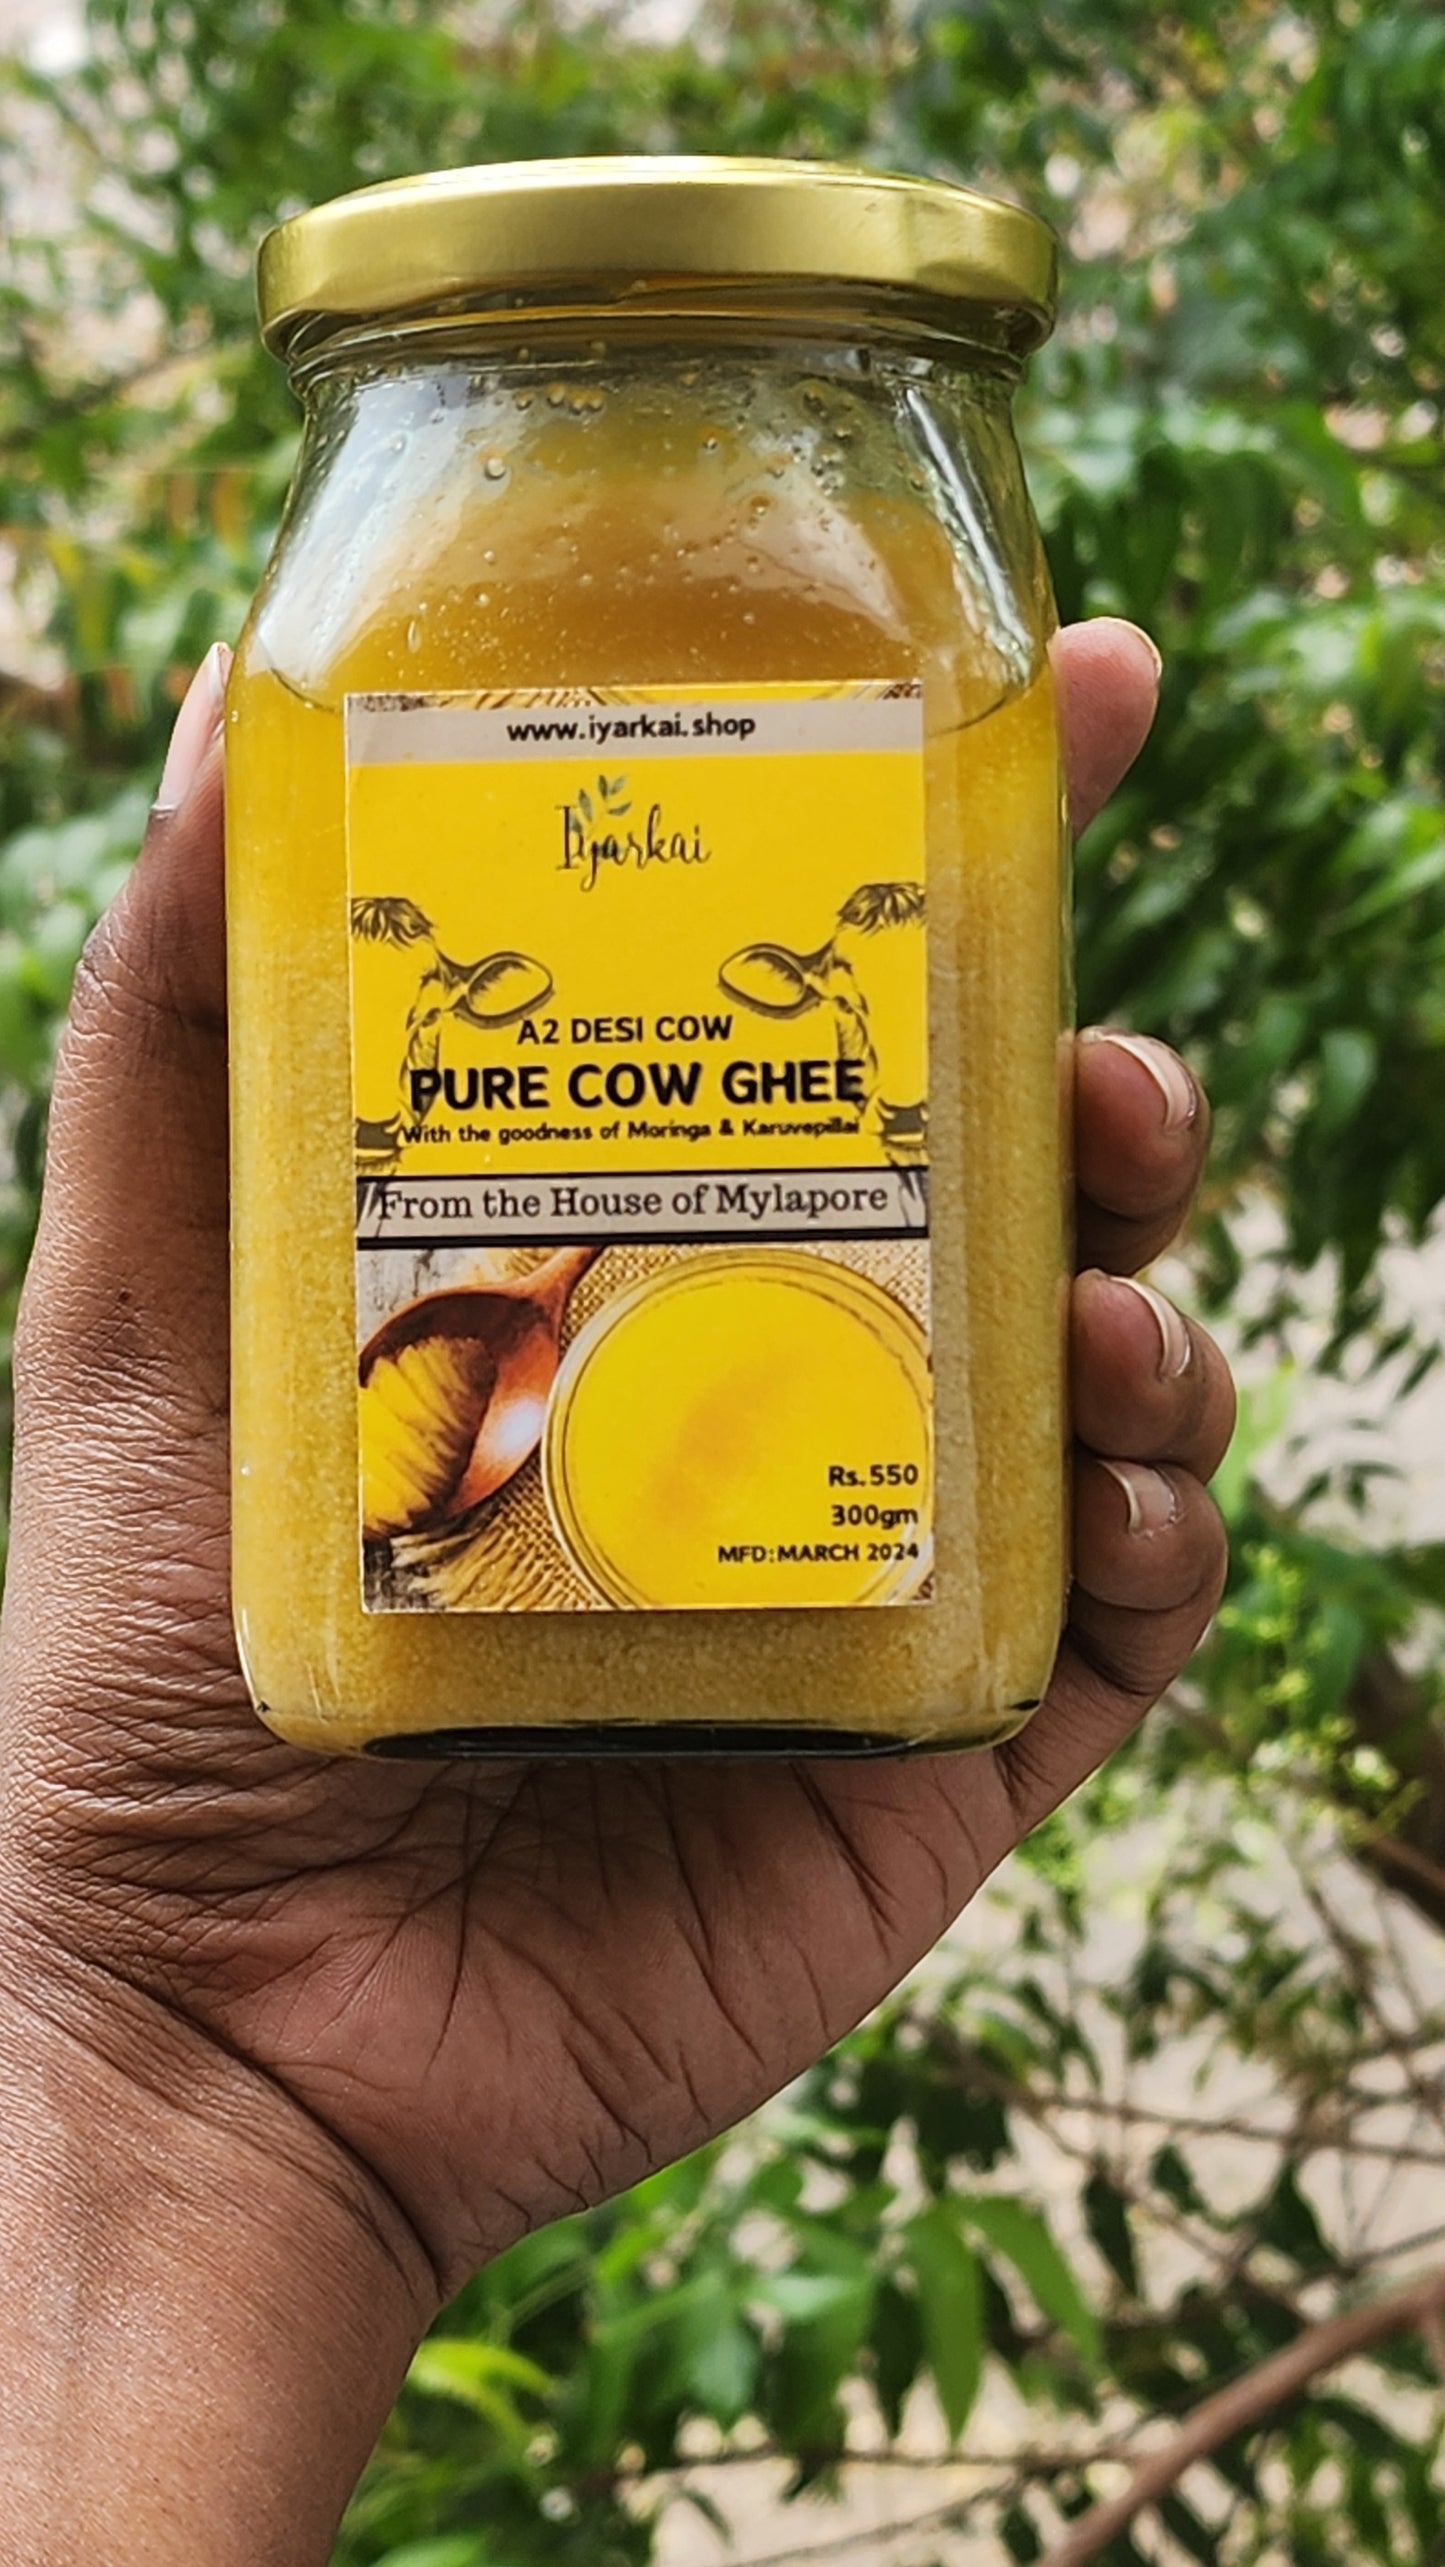 A2 PURE COW GHEE with the goodness of Moringa & Karuvepillai(300gm)